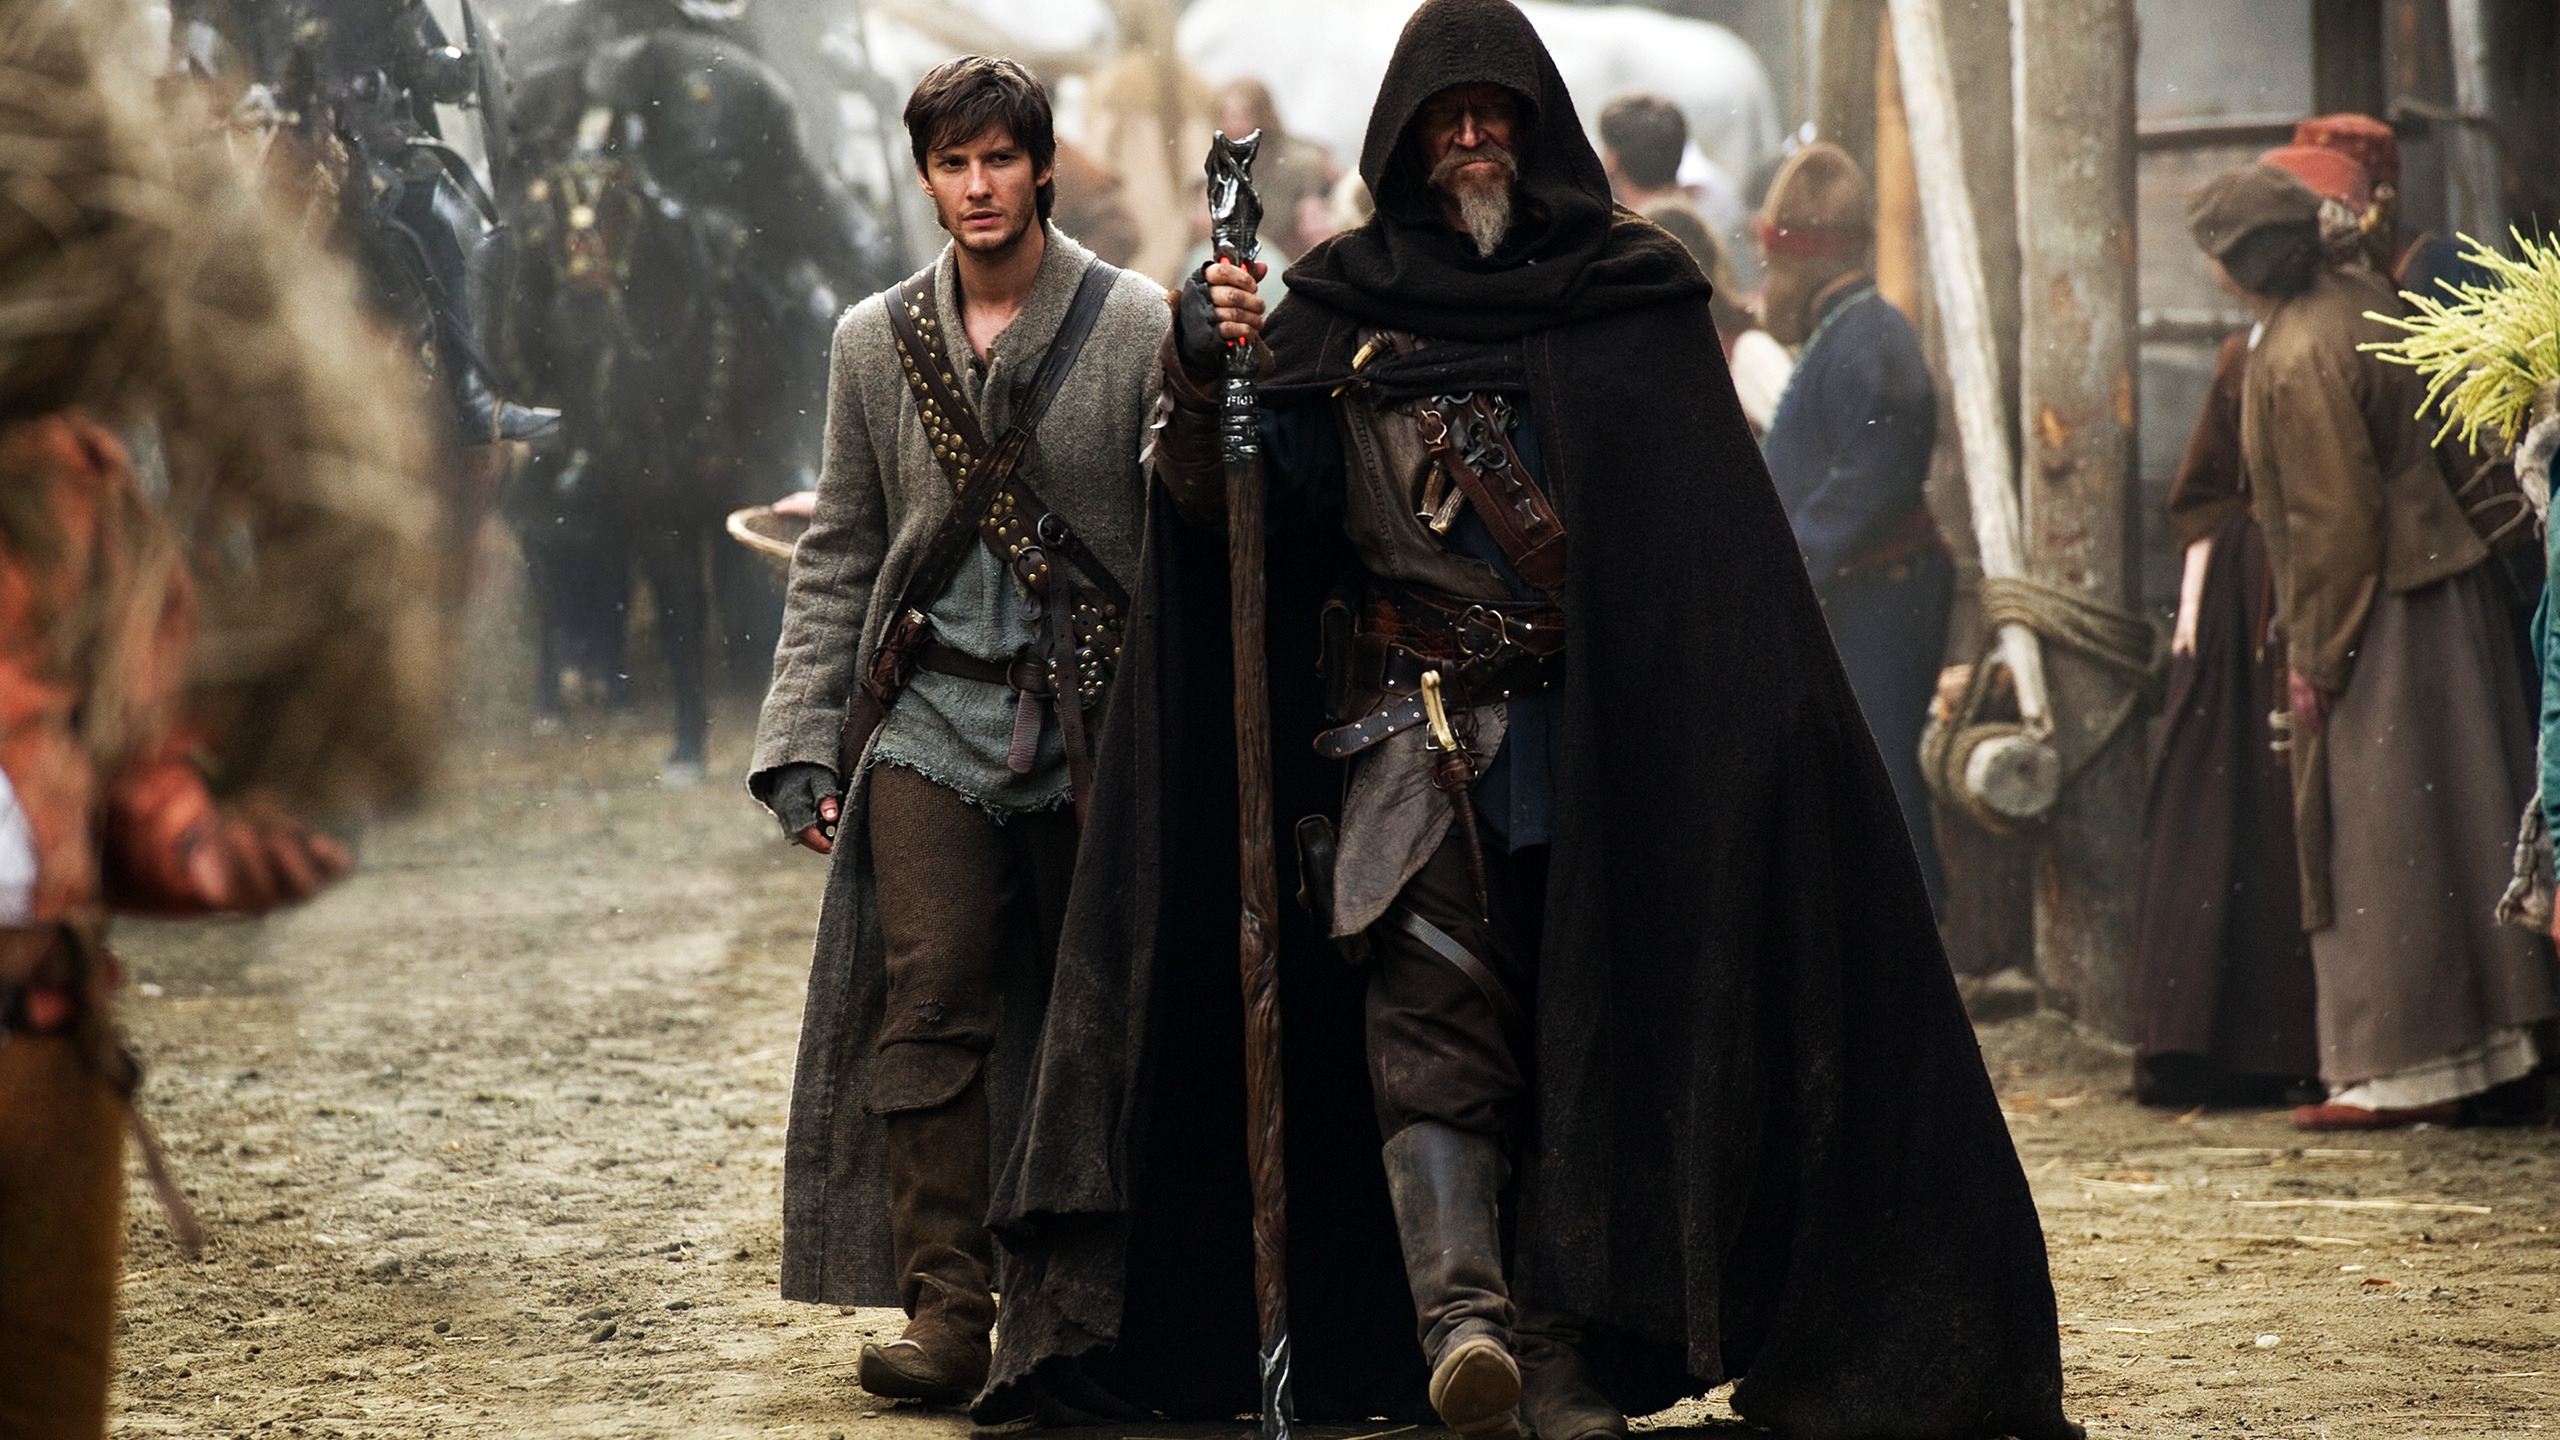 The Seventh Son Movie 2013 for 2560x1440 HDTV resolution